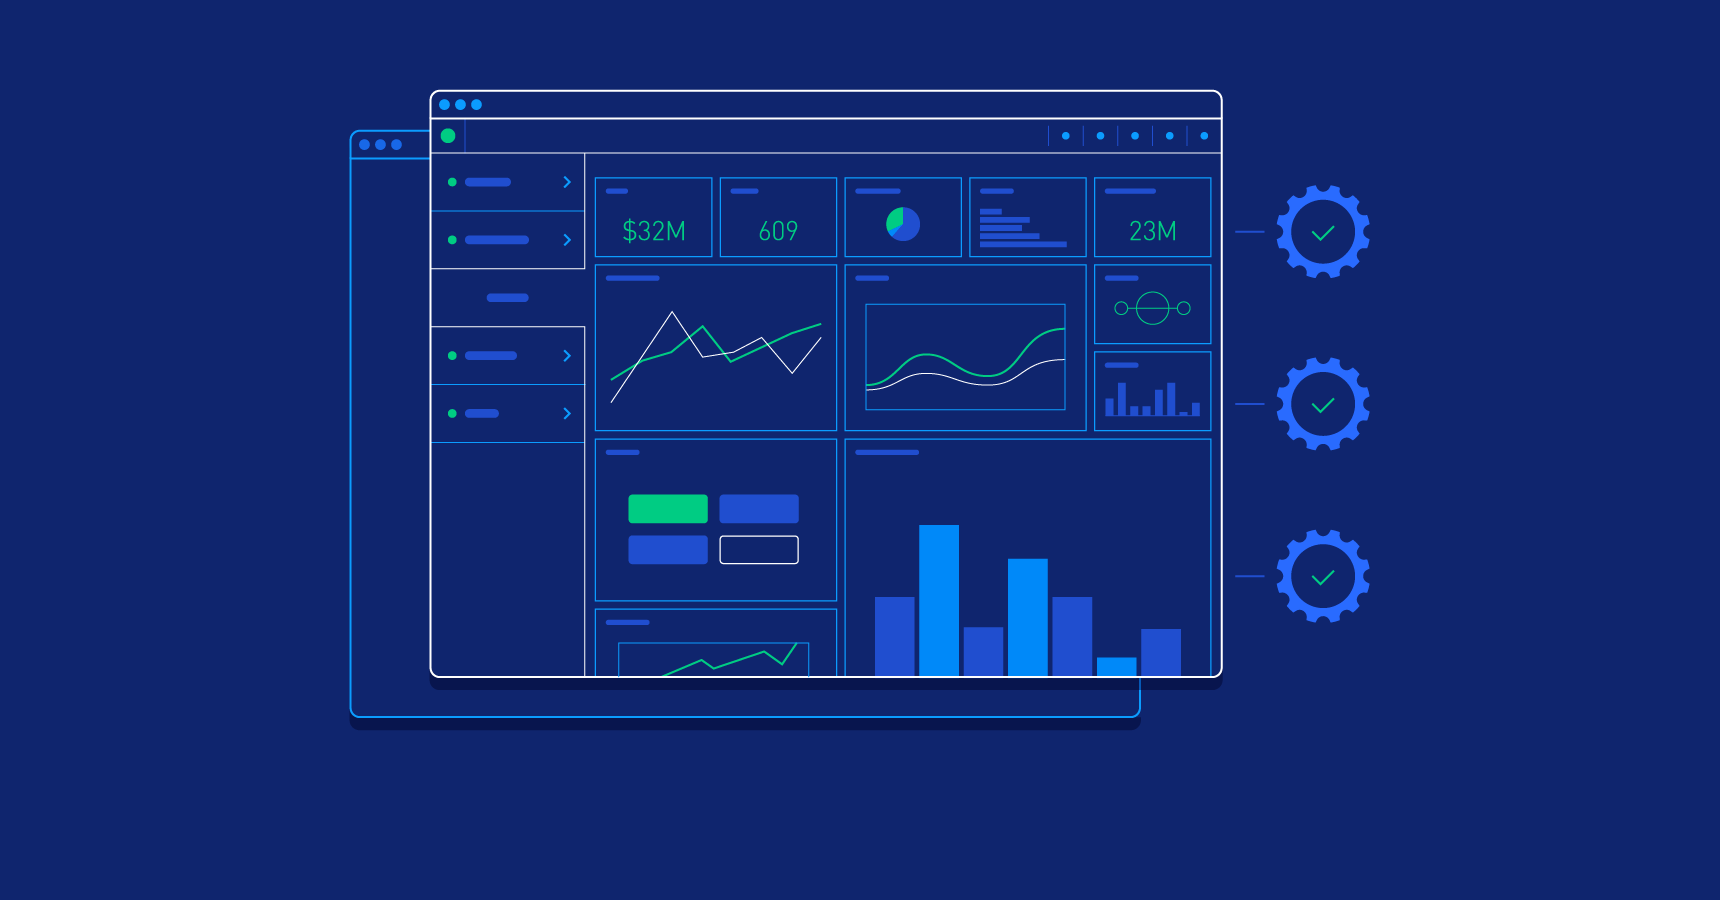 Upgrade Your Analytics with These Dashboard Design Inspirations